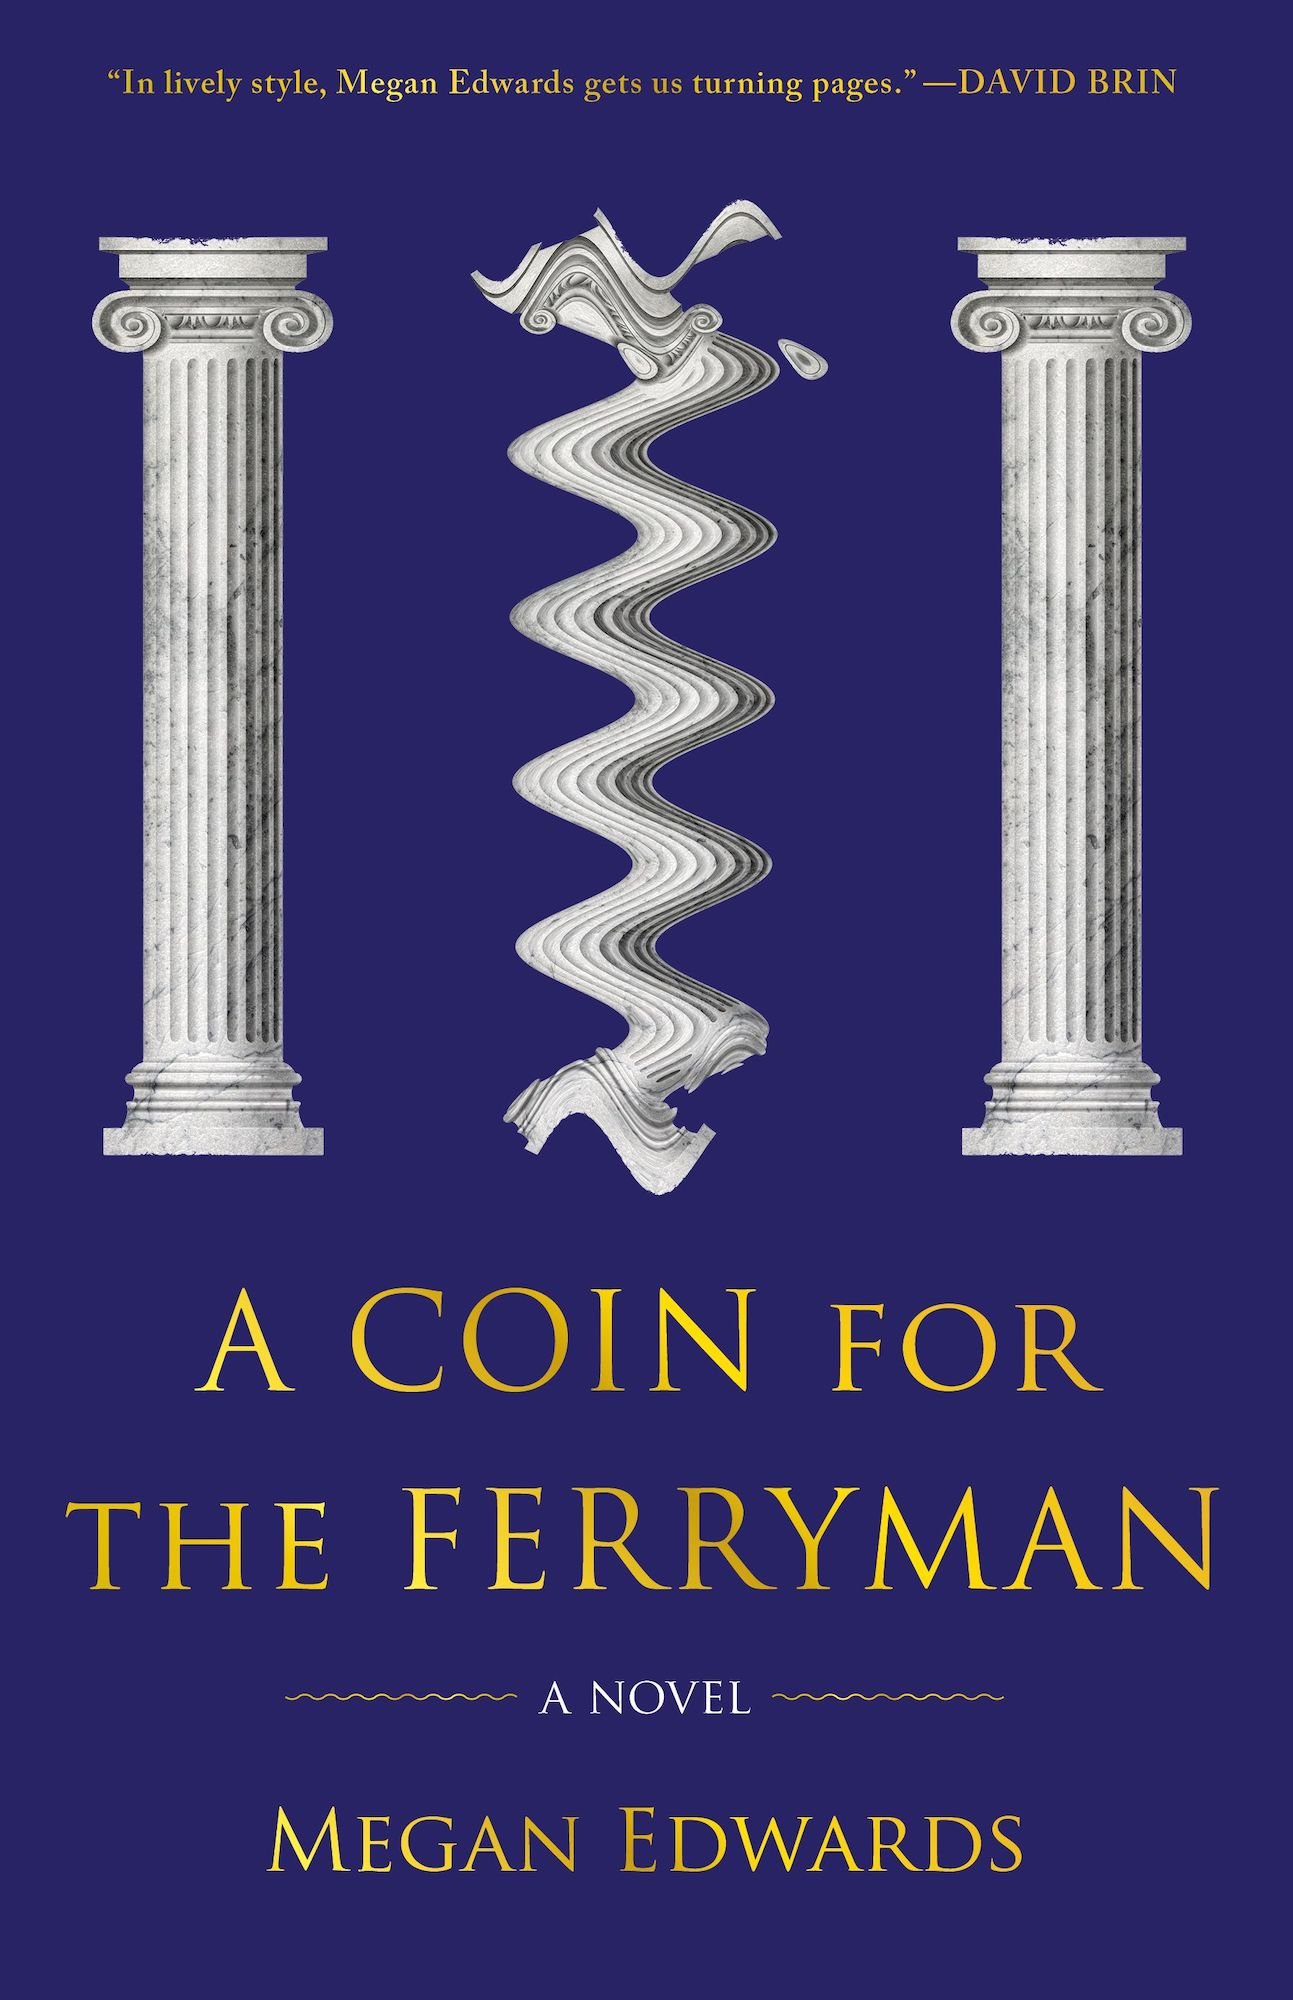 Megan Edwards is an award winning novelist who's pulling out all the stops for her next book. Get ready for 'A Coin for the Ferryman' ahead of its release.